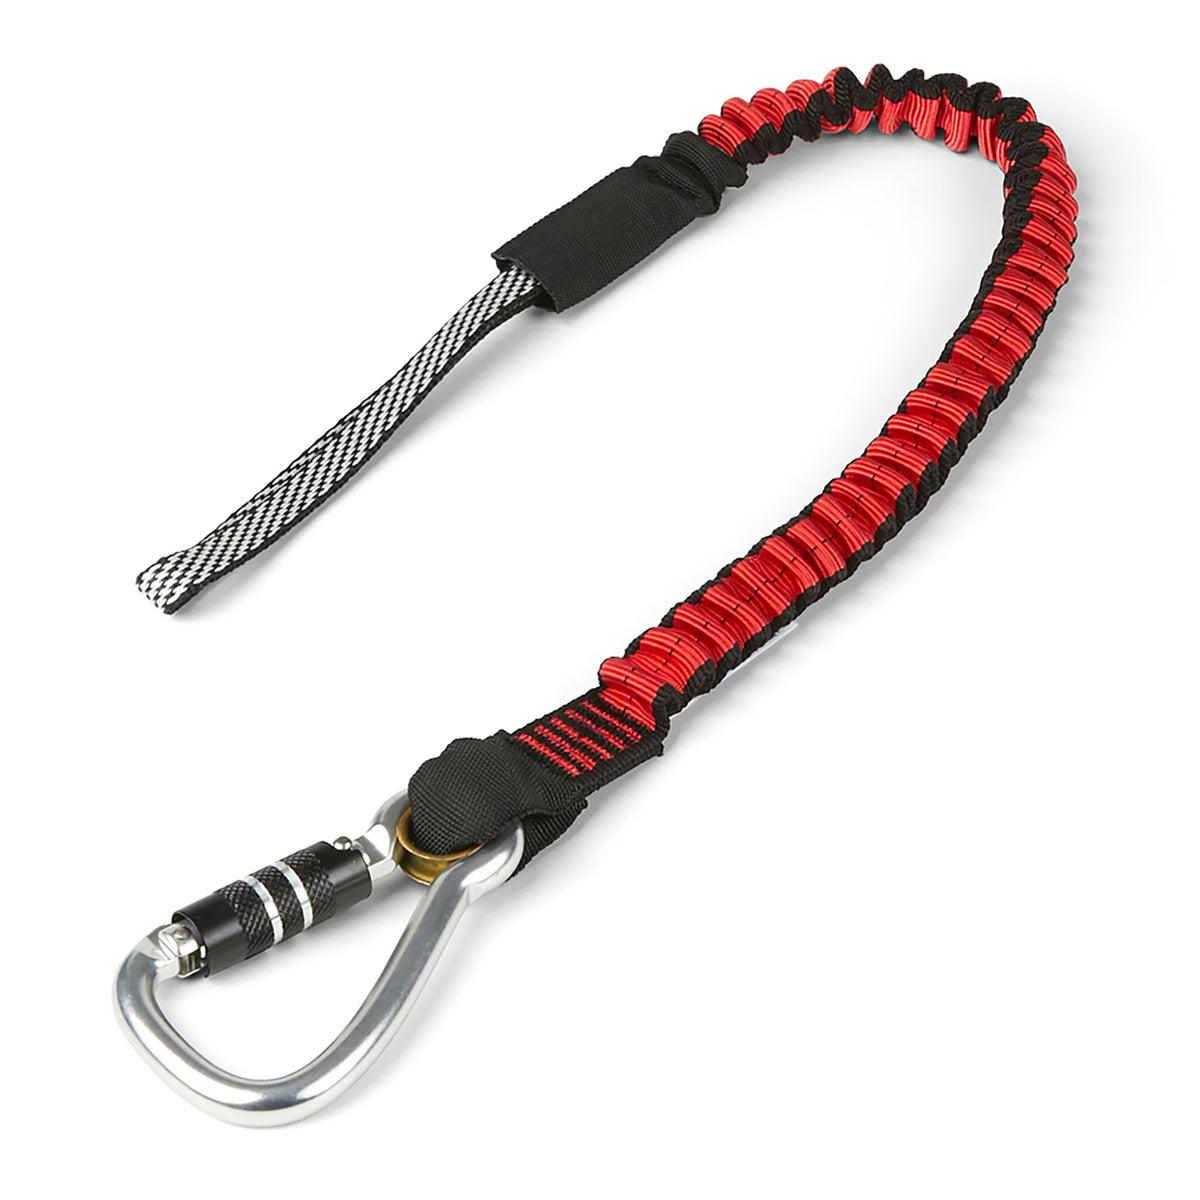 Bungee Tether Dual-Action Carabiner - 18kg / 40lb